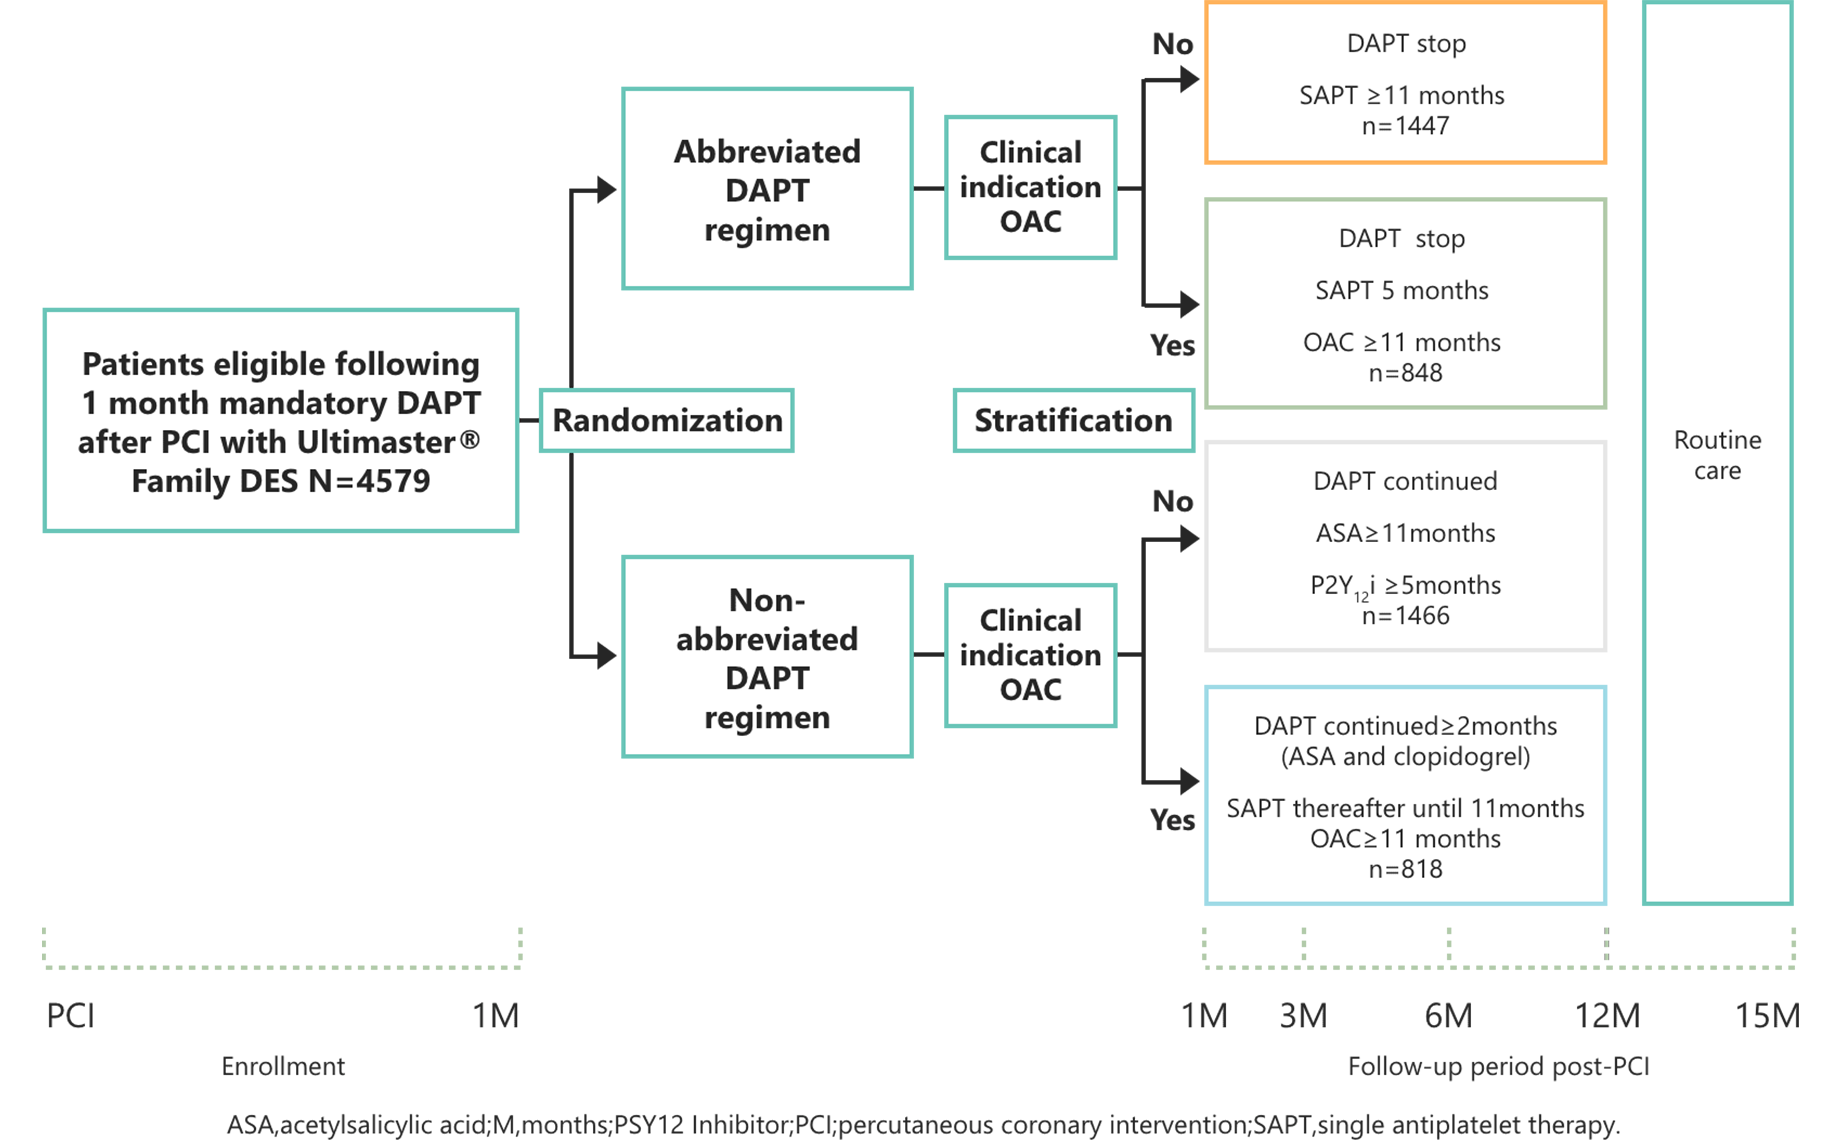 Design about clinical evidence of MASTER DAPT OAC (image)